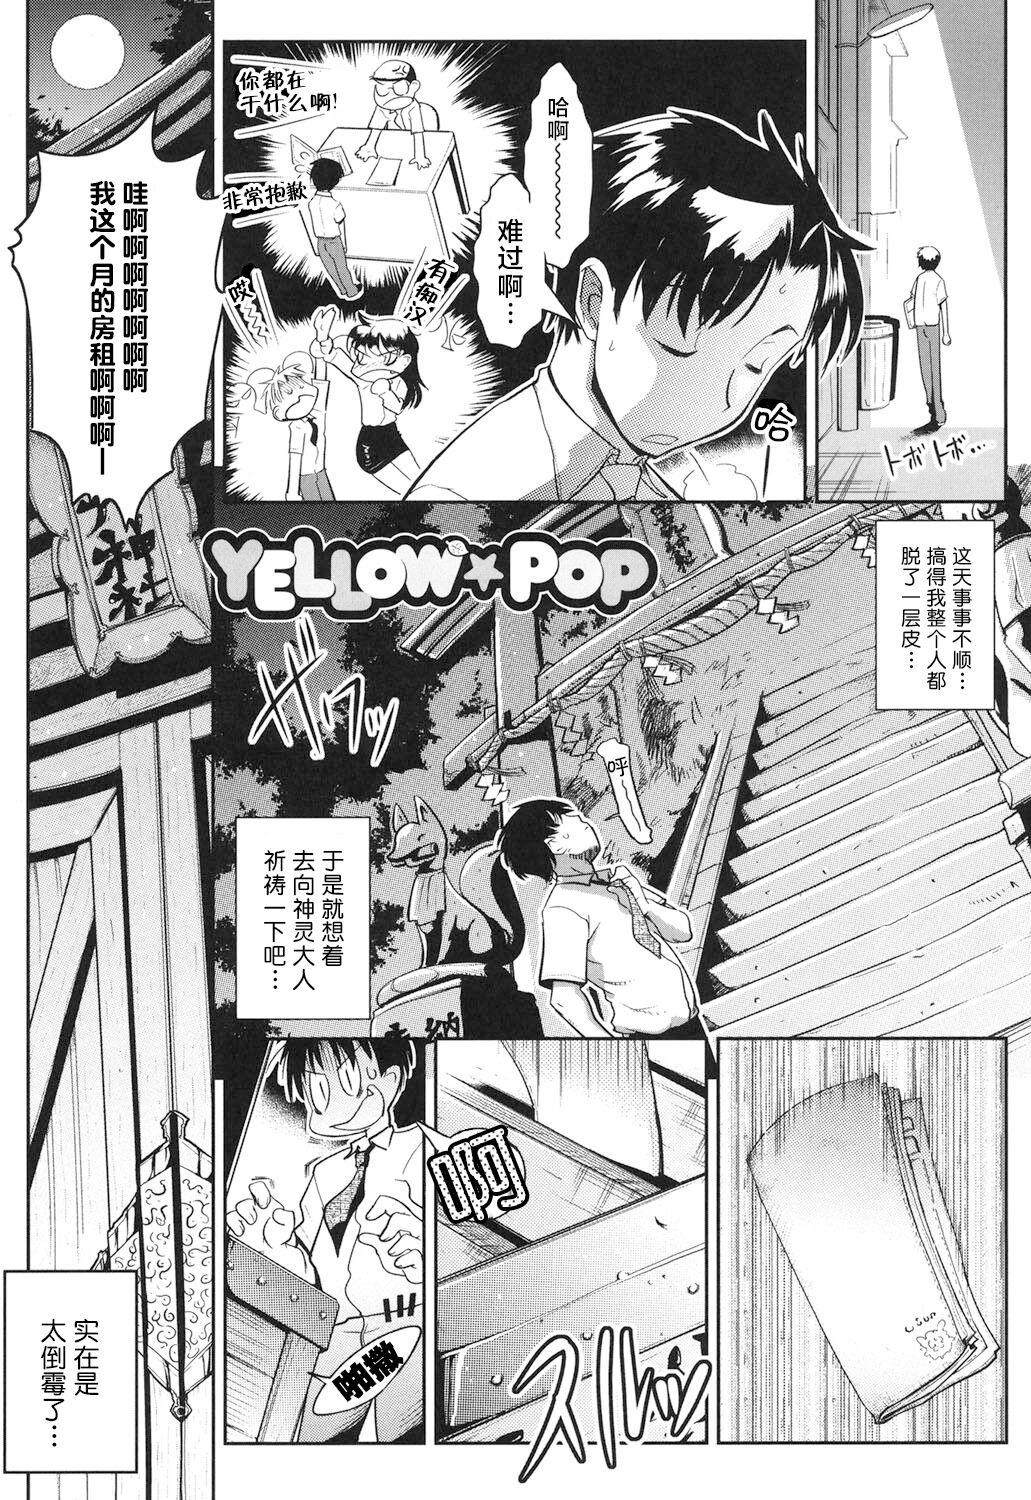 Dicksucking YELLOW★POP Ch. 1 Gaping - Page 2